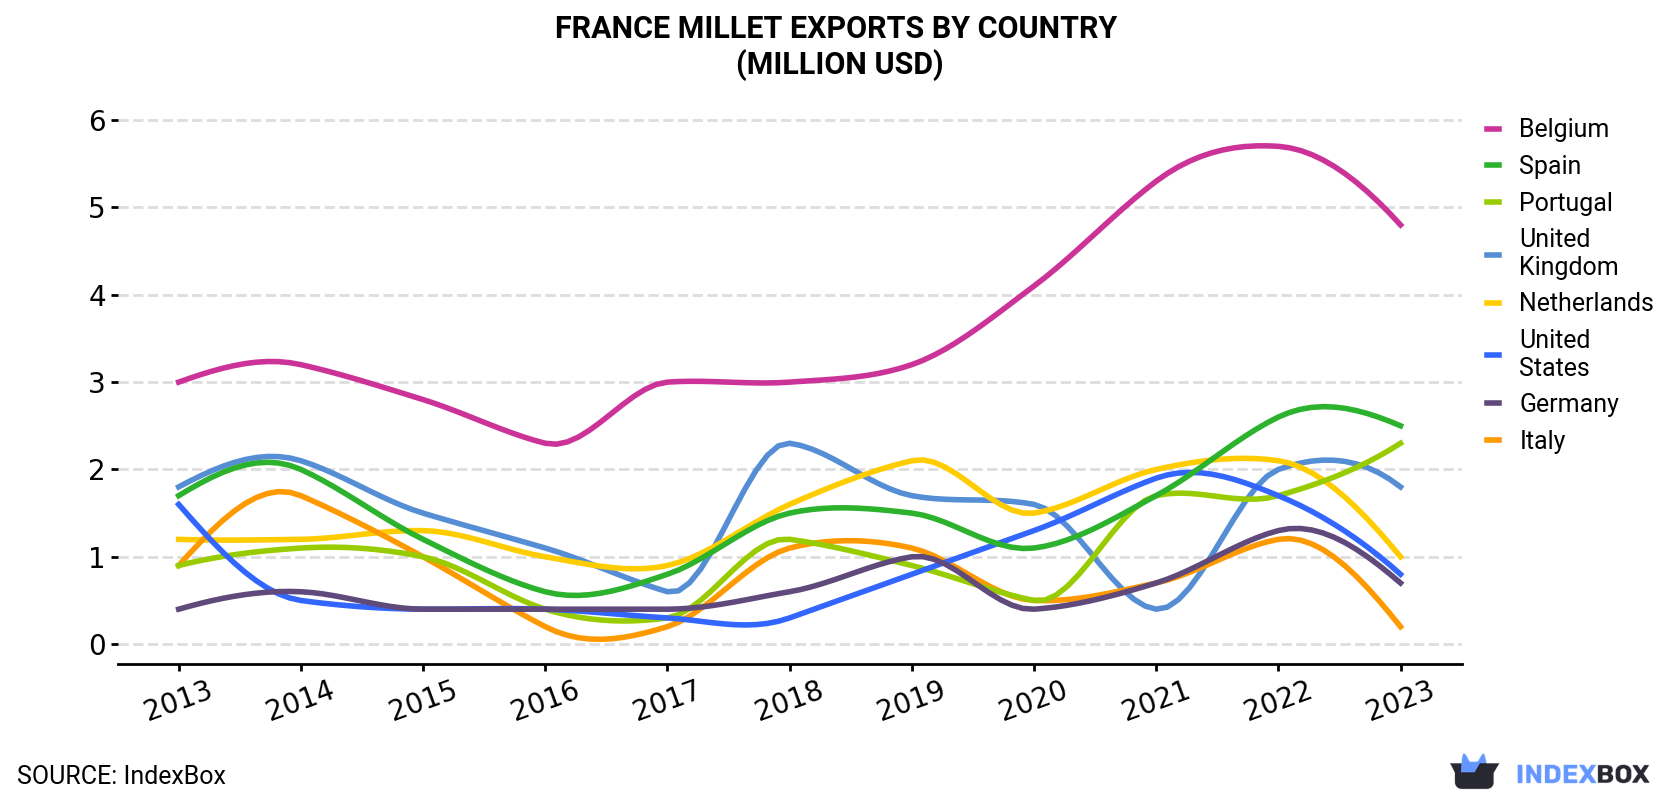 France Millet Exports By Country (Million USD)